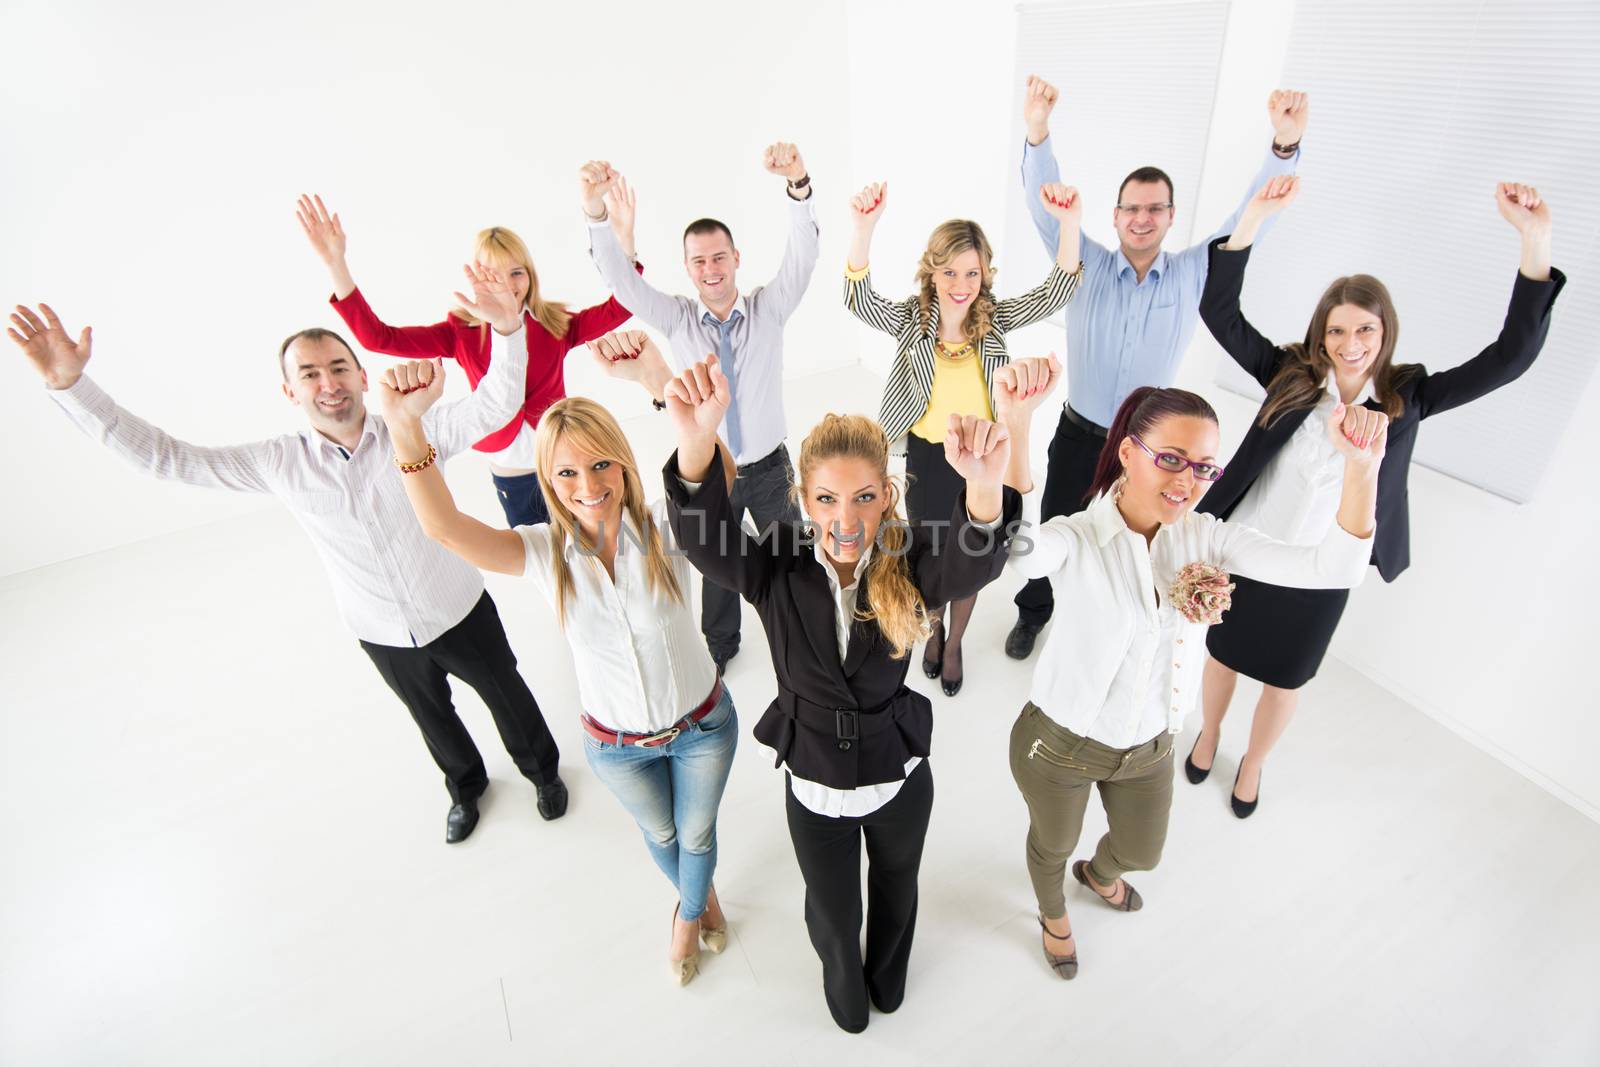 Group of a happy Business People standing together with raised arms.